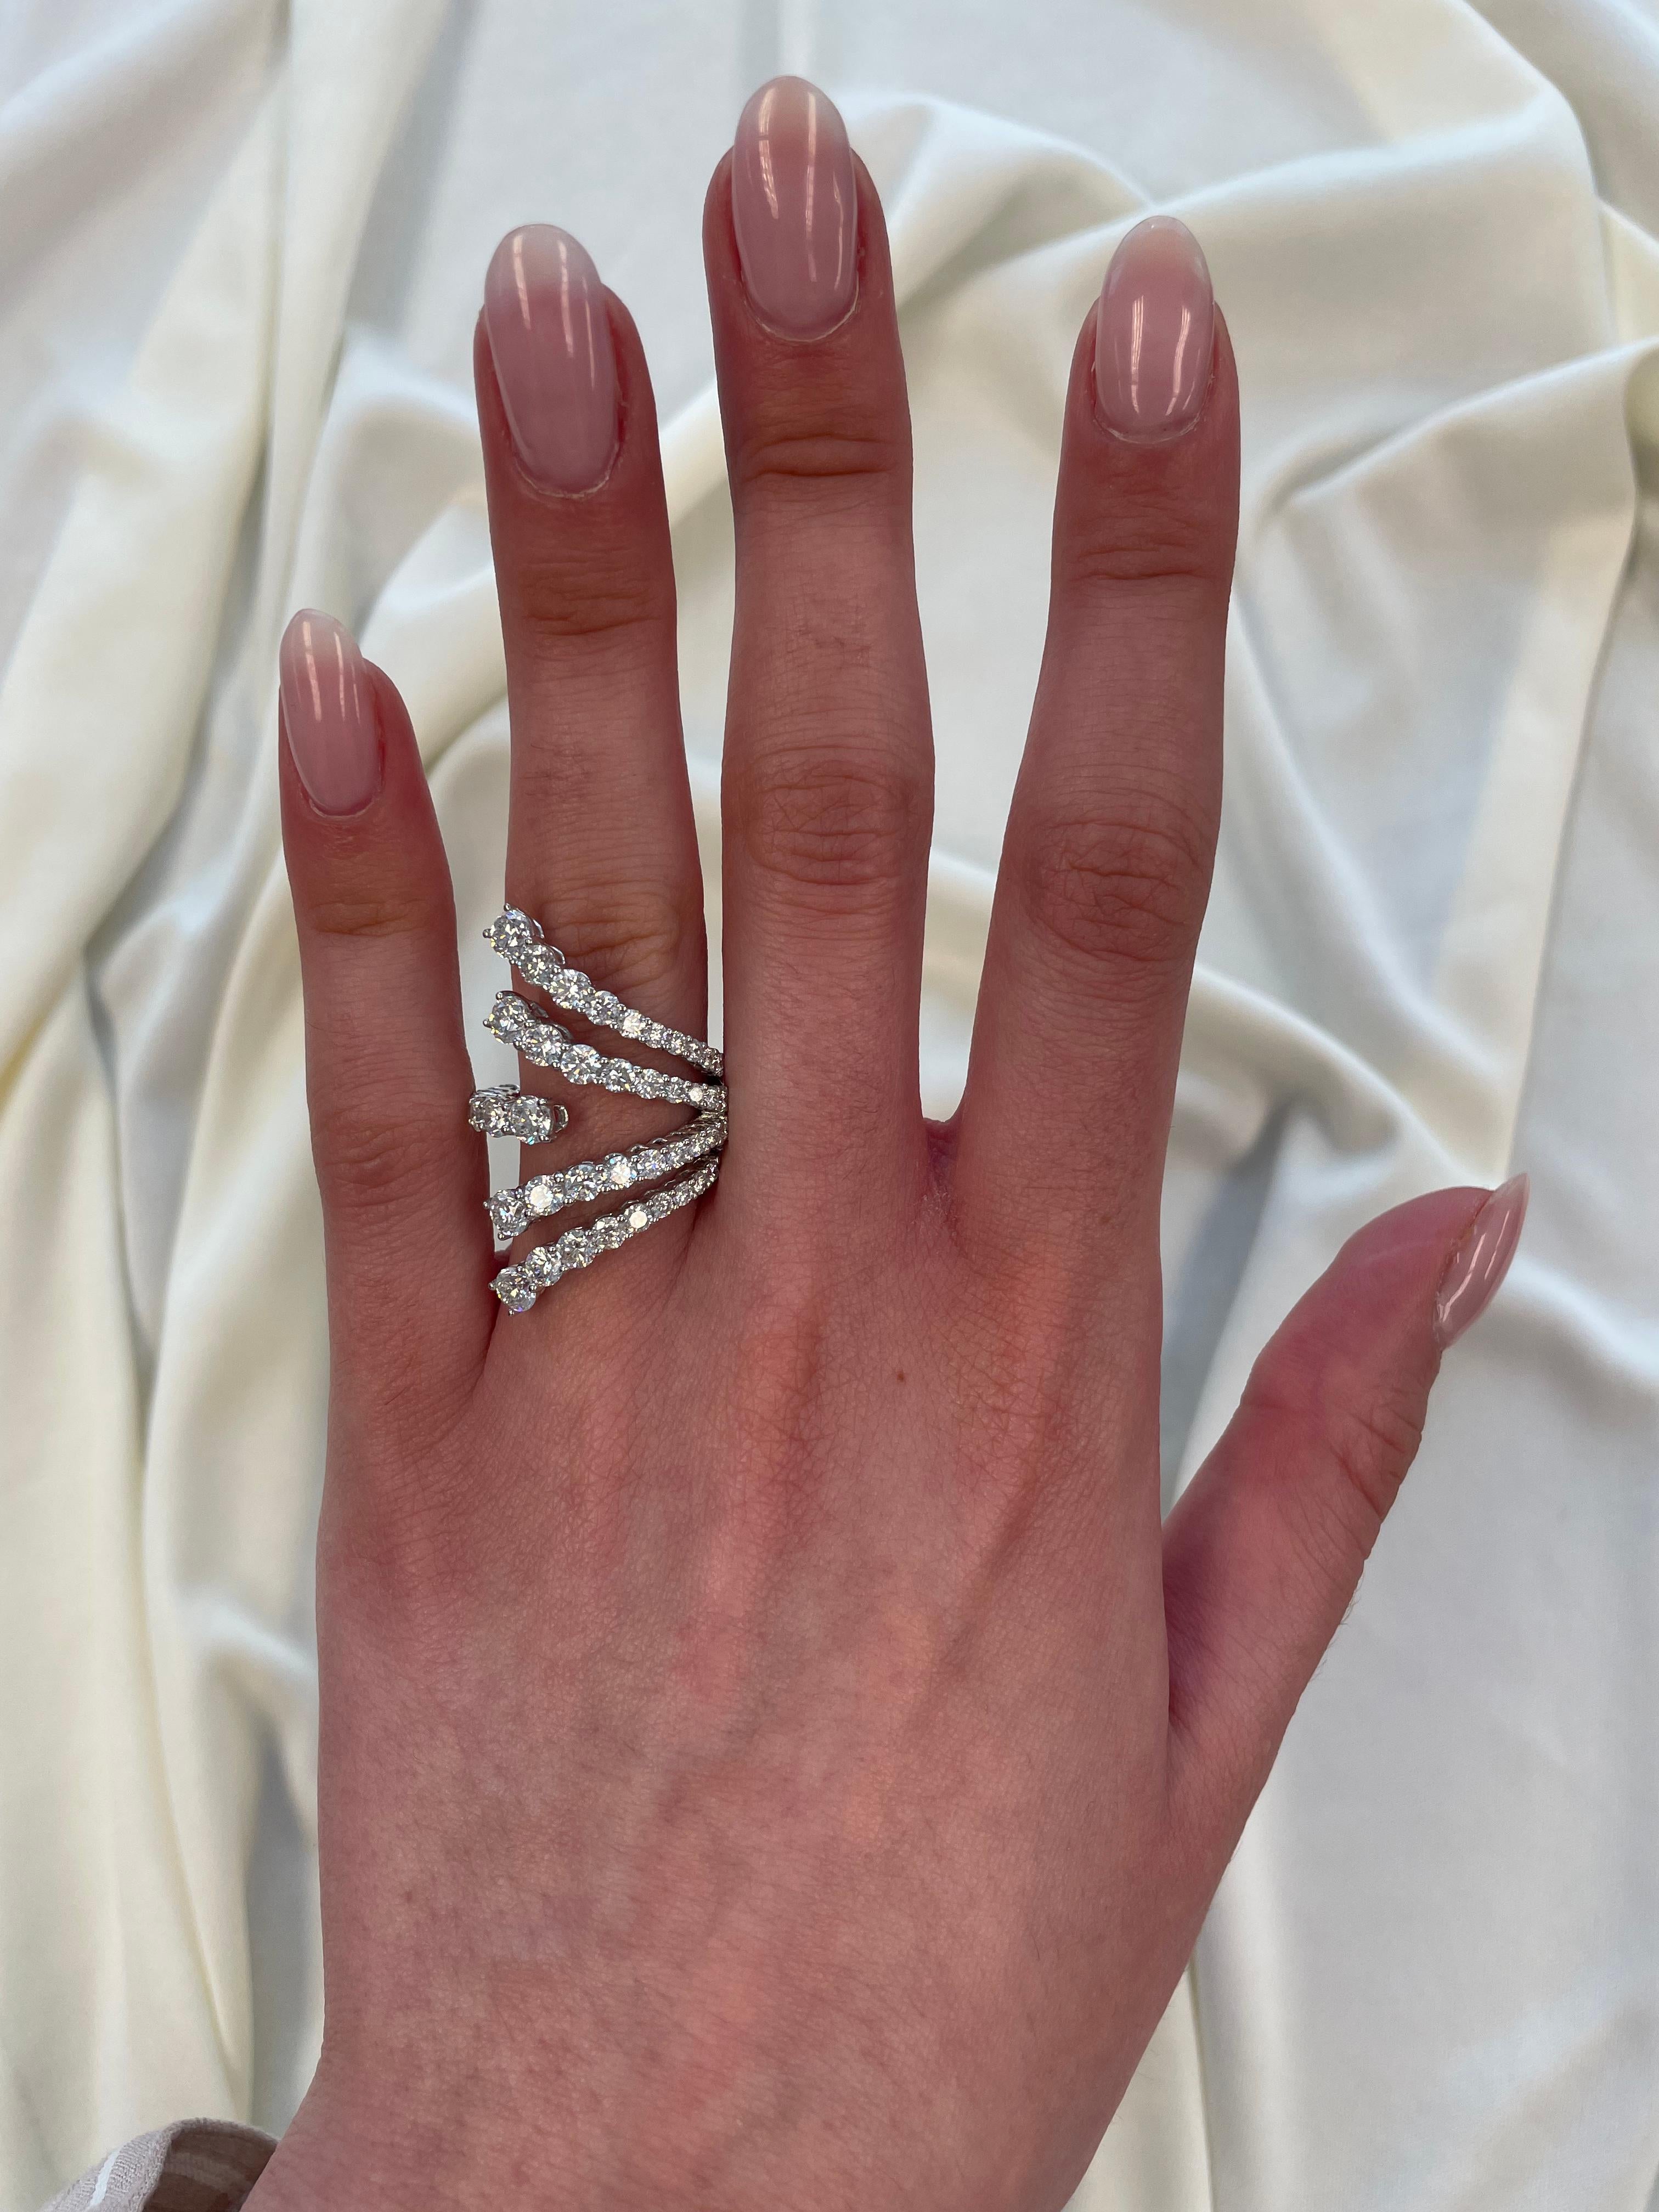 Stunning modern and unique open shank floating diamond ring. By Alexander of Beverly Hills.
46 round brilliant cut diamonds, 3.76 carats. Approximately G/H color and SI clarity. 18-karat white gold, 7.77 grams, current ring size 7.
Accommodated with